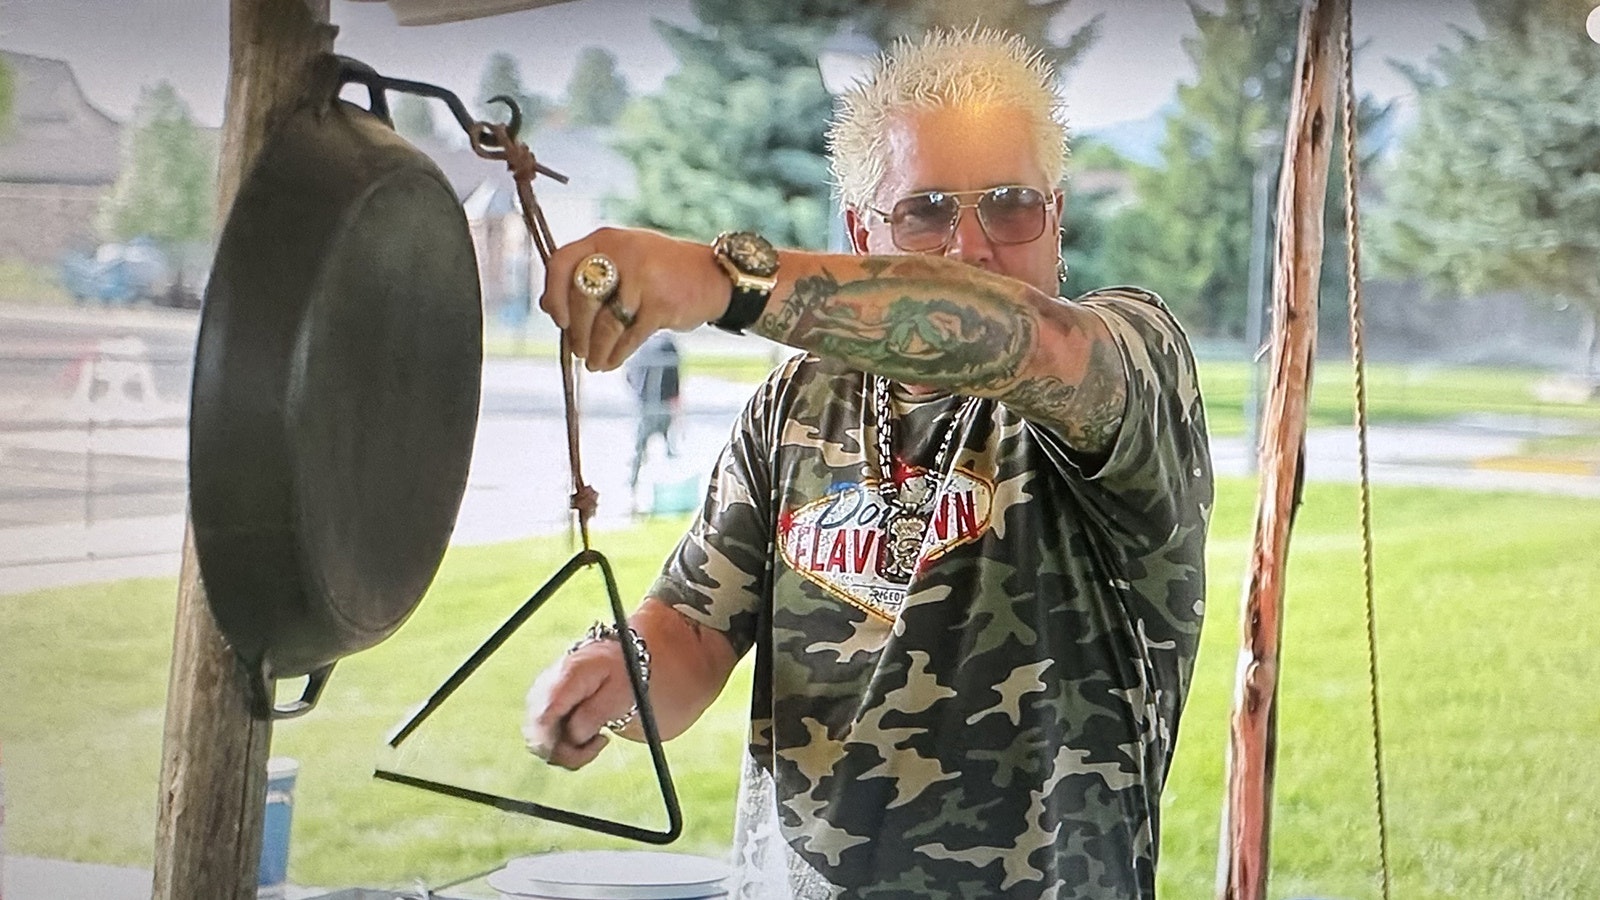 Guy Fieri rings the bell for the chuck wagon dinner at the Buffalo Bill Center for the West.